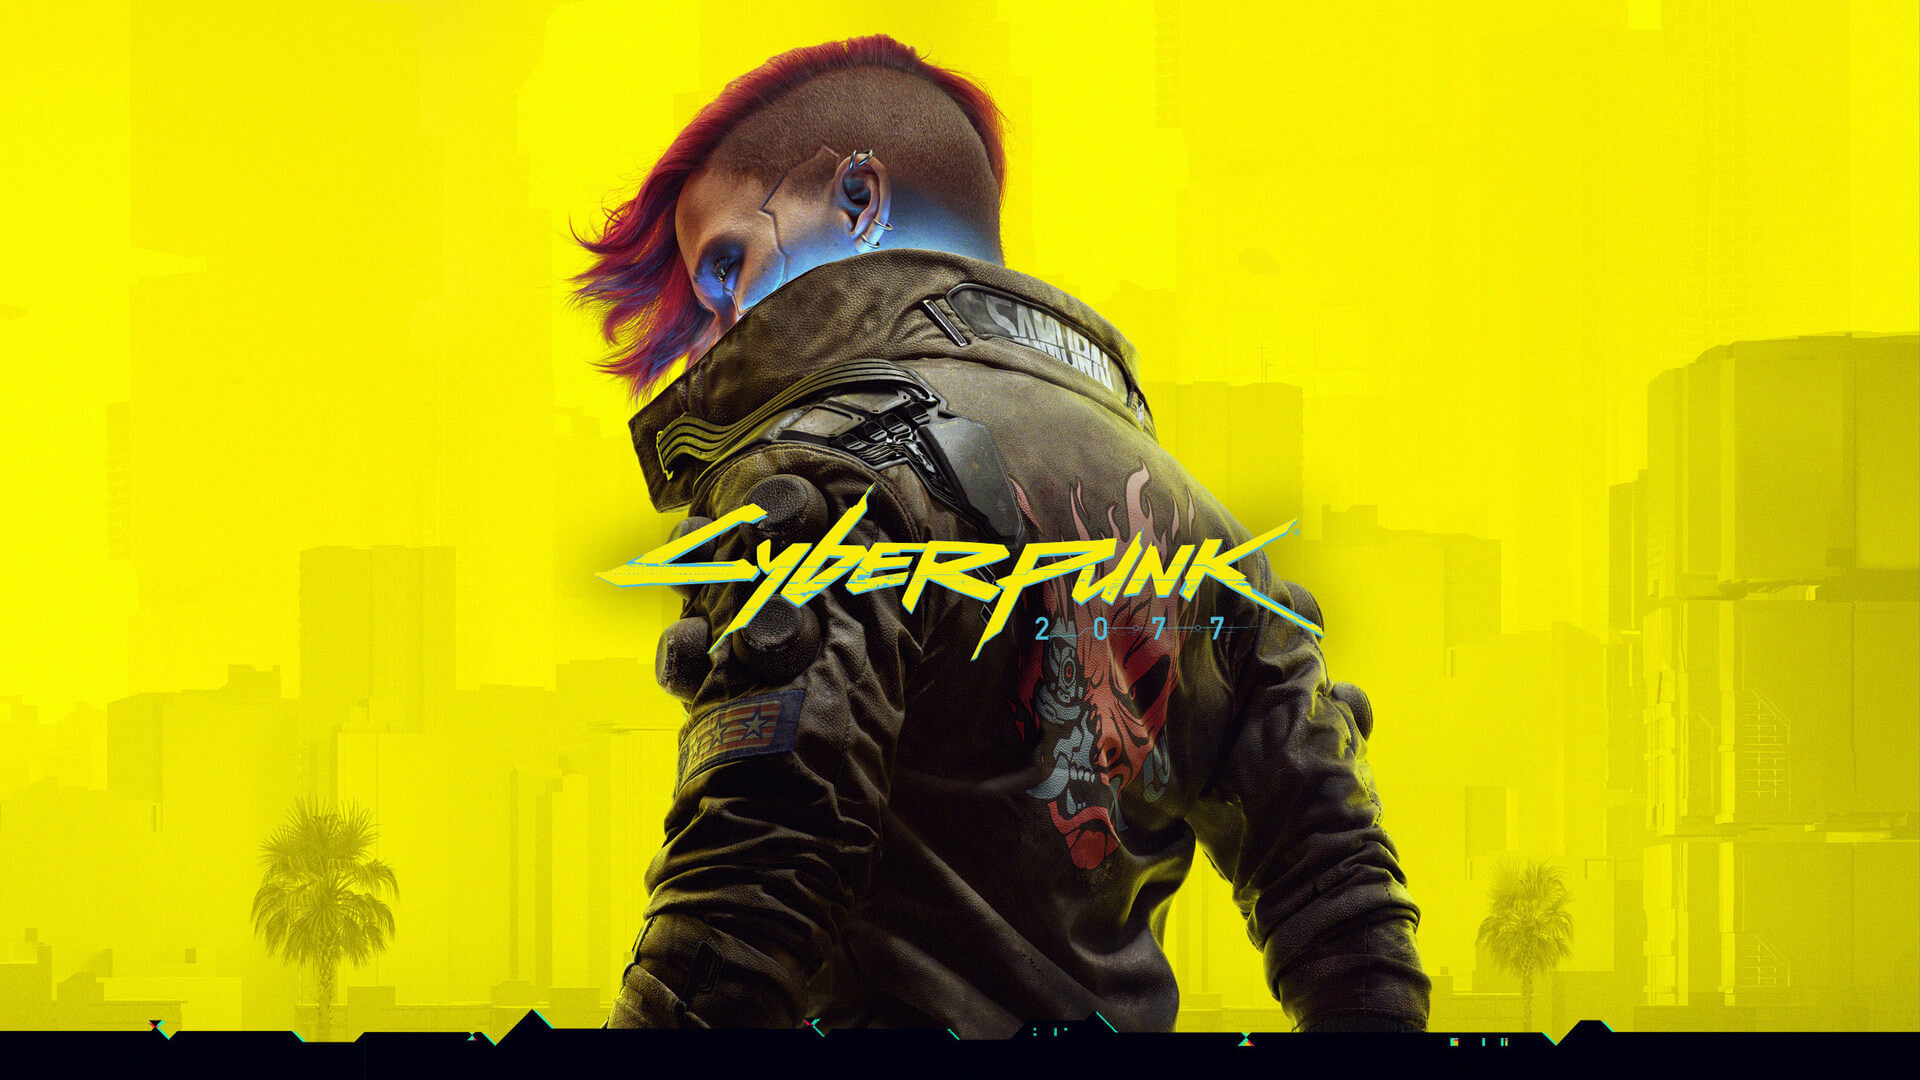 Cyberpunk 2077 HD Reworked Project 2.0 is currently in development